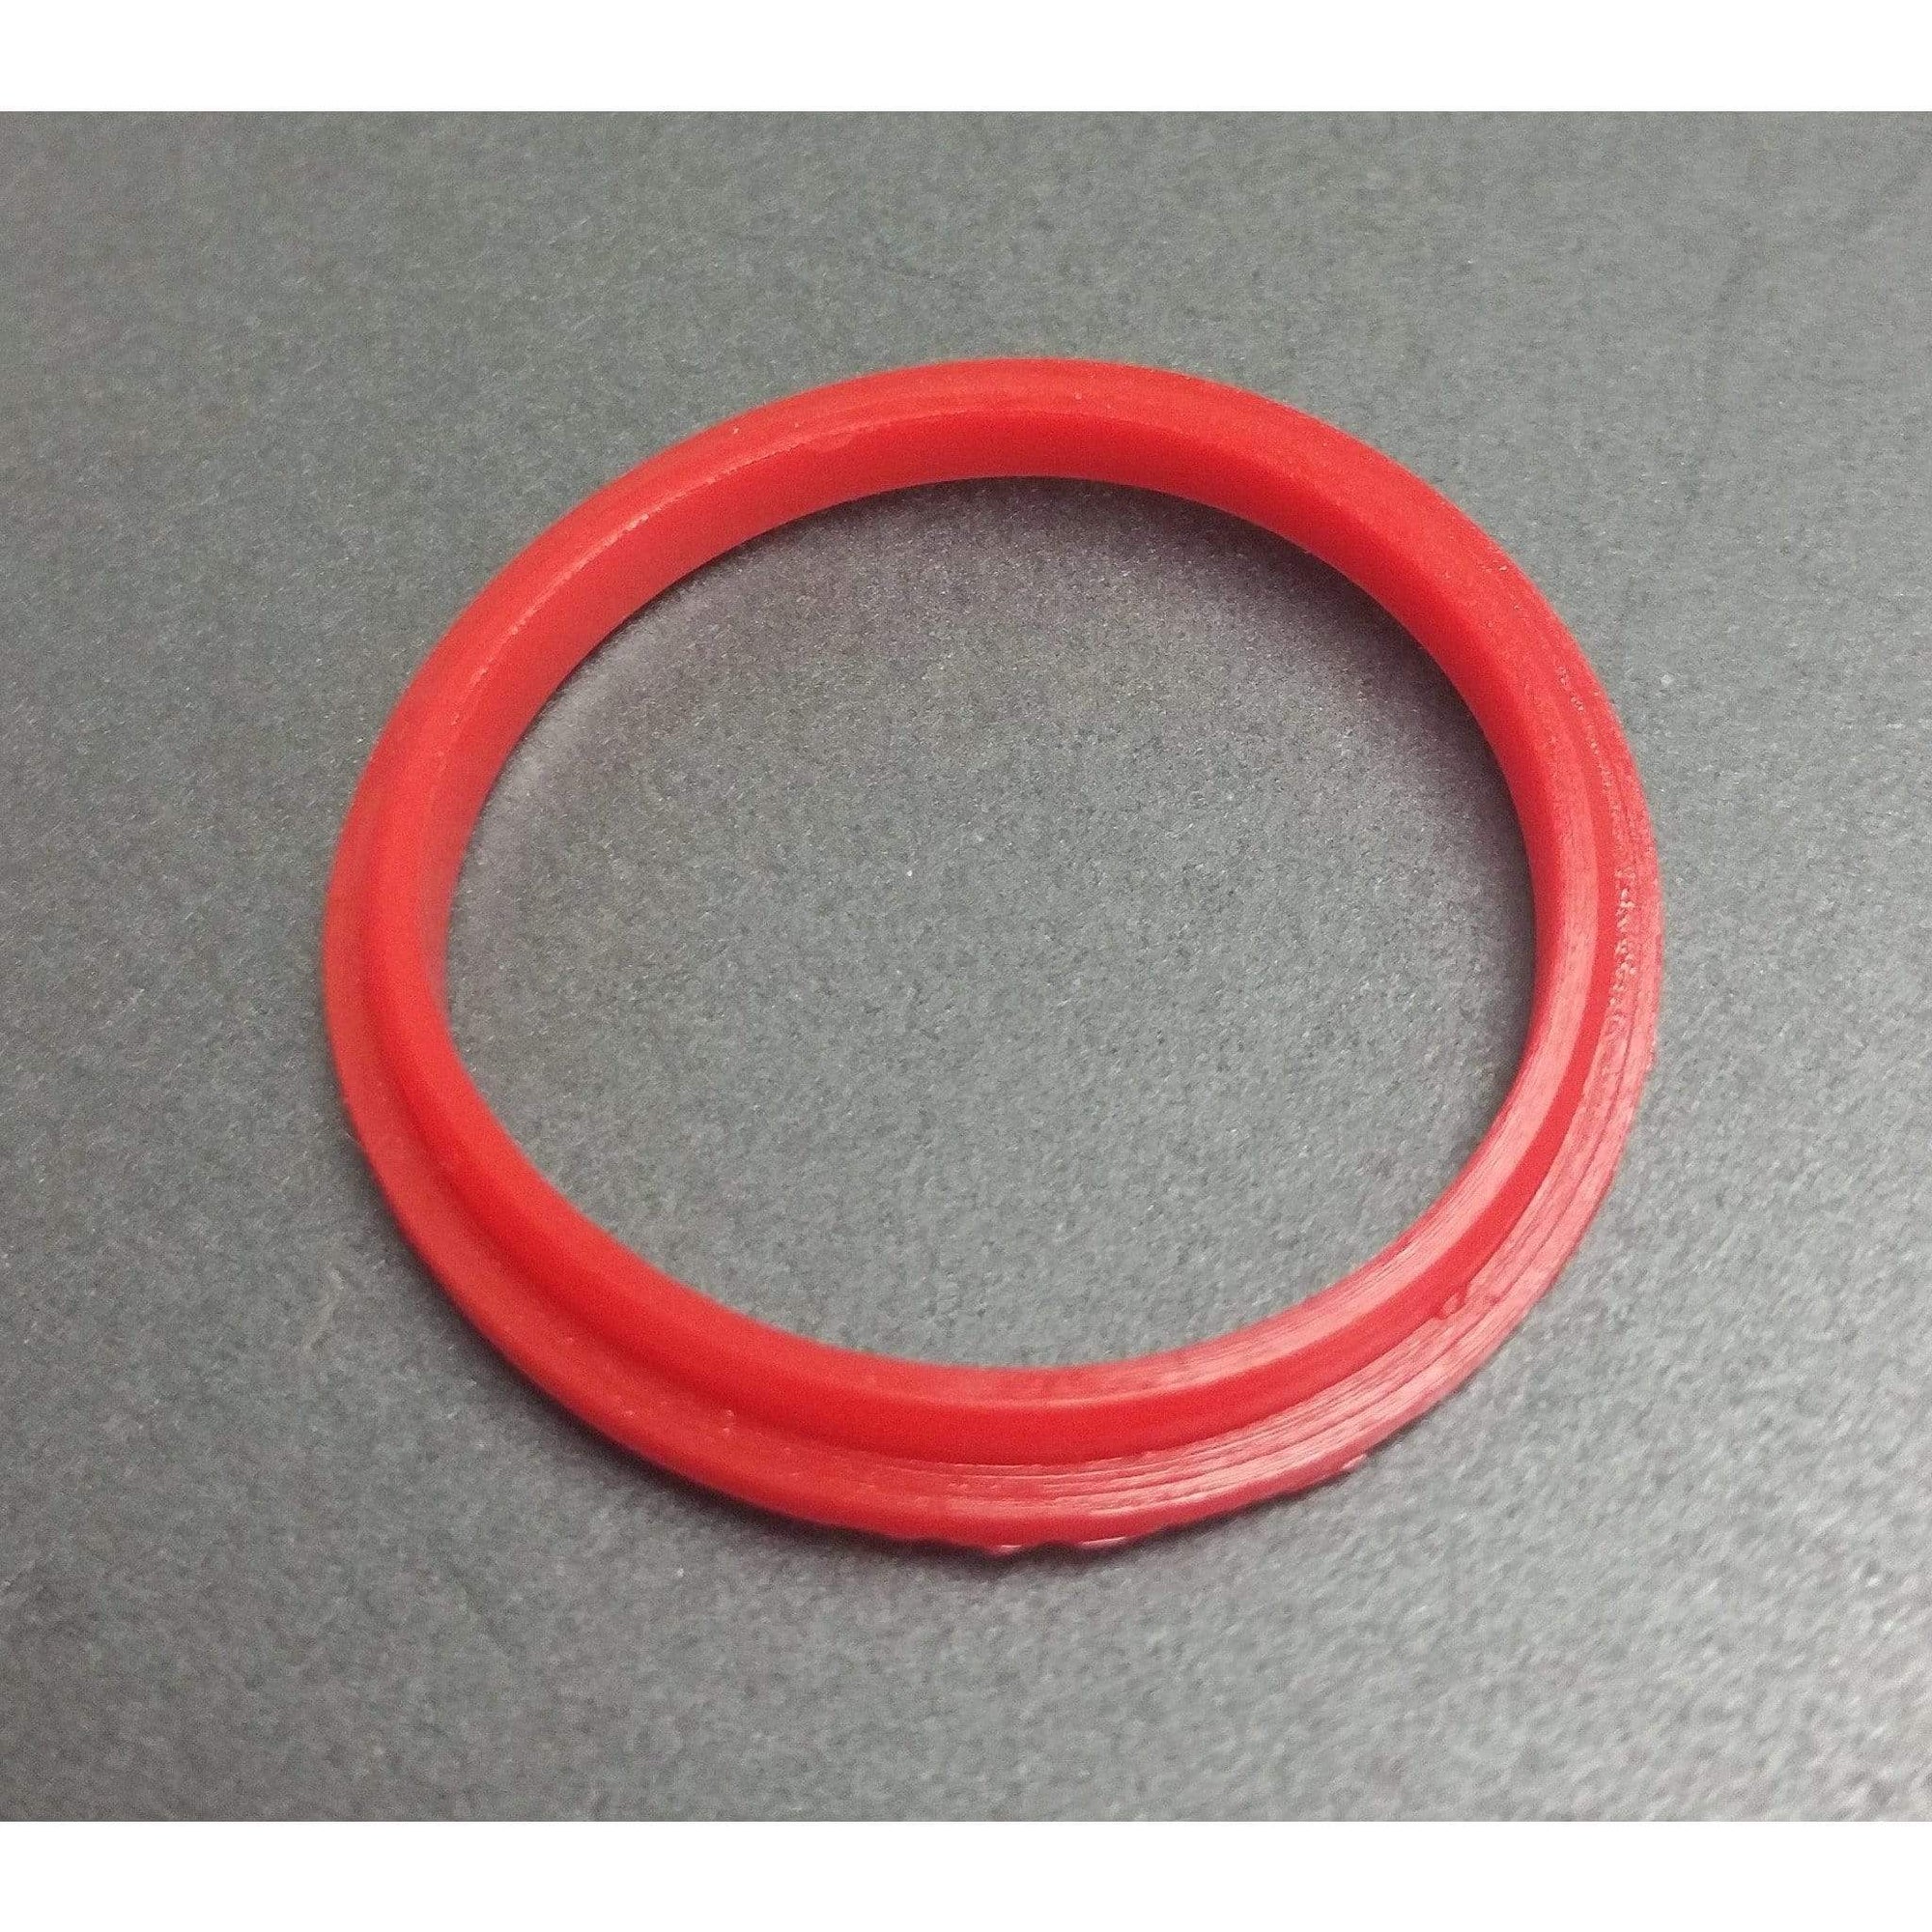 TFV8 Replacement Seals Bottom Glass Seal Red Seals/Oring's